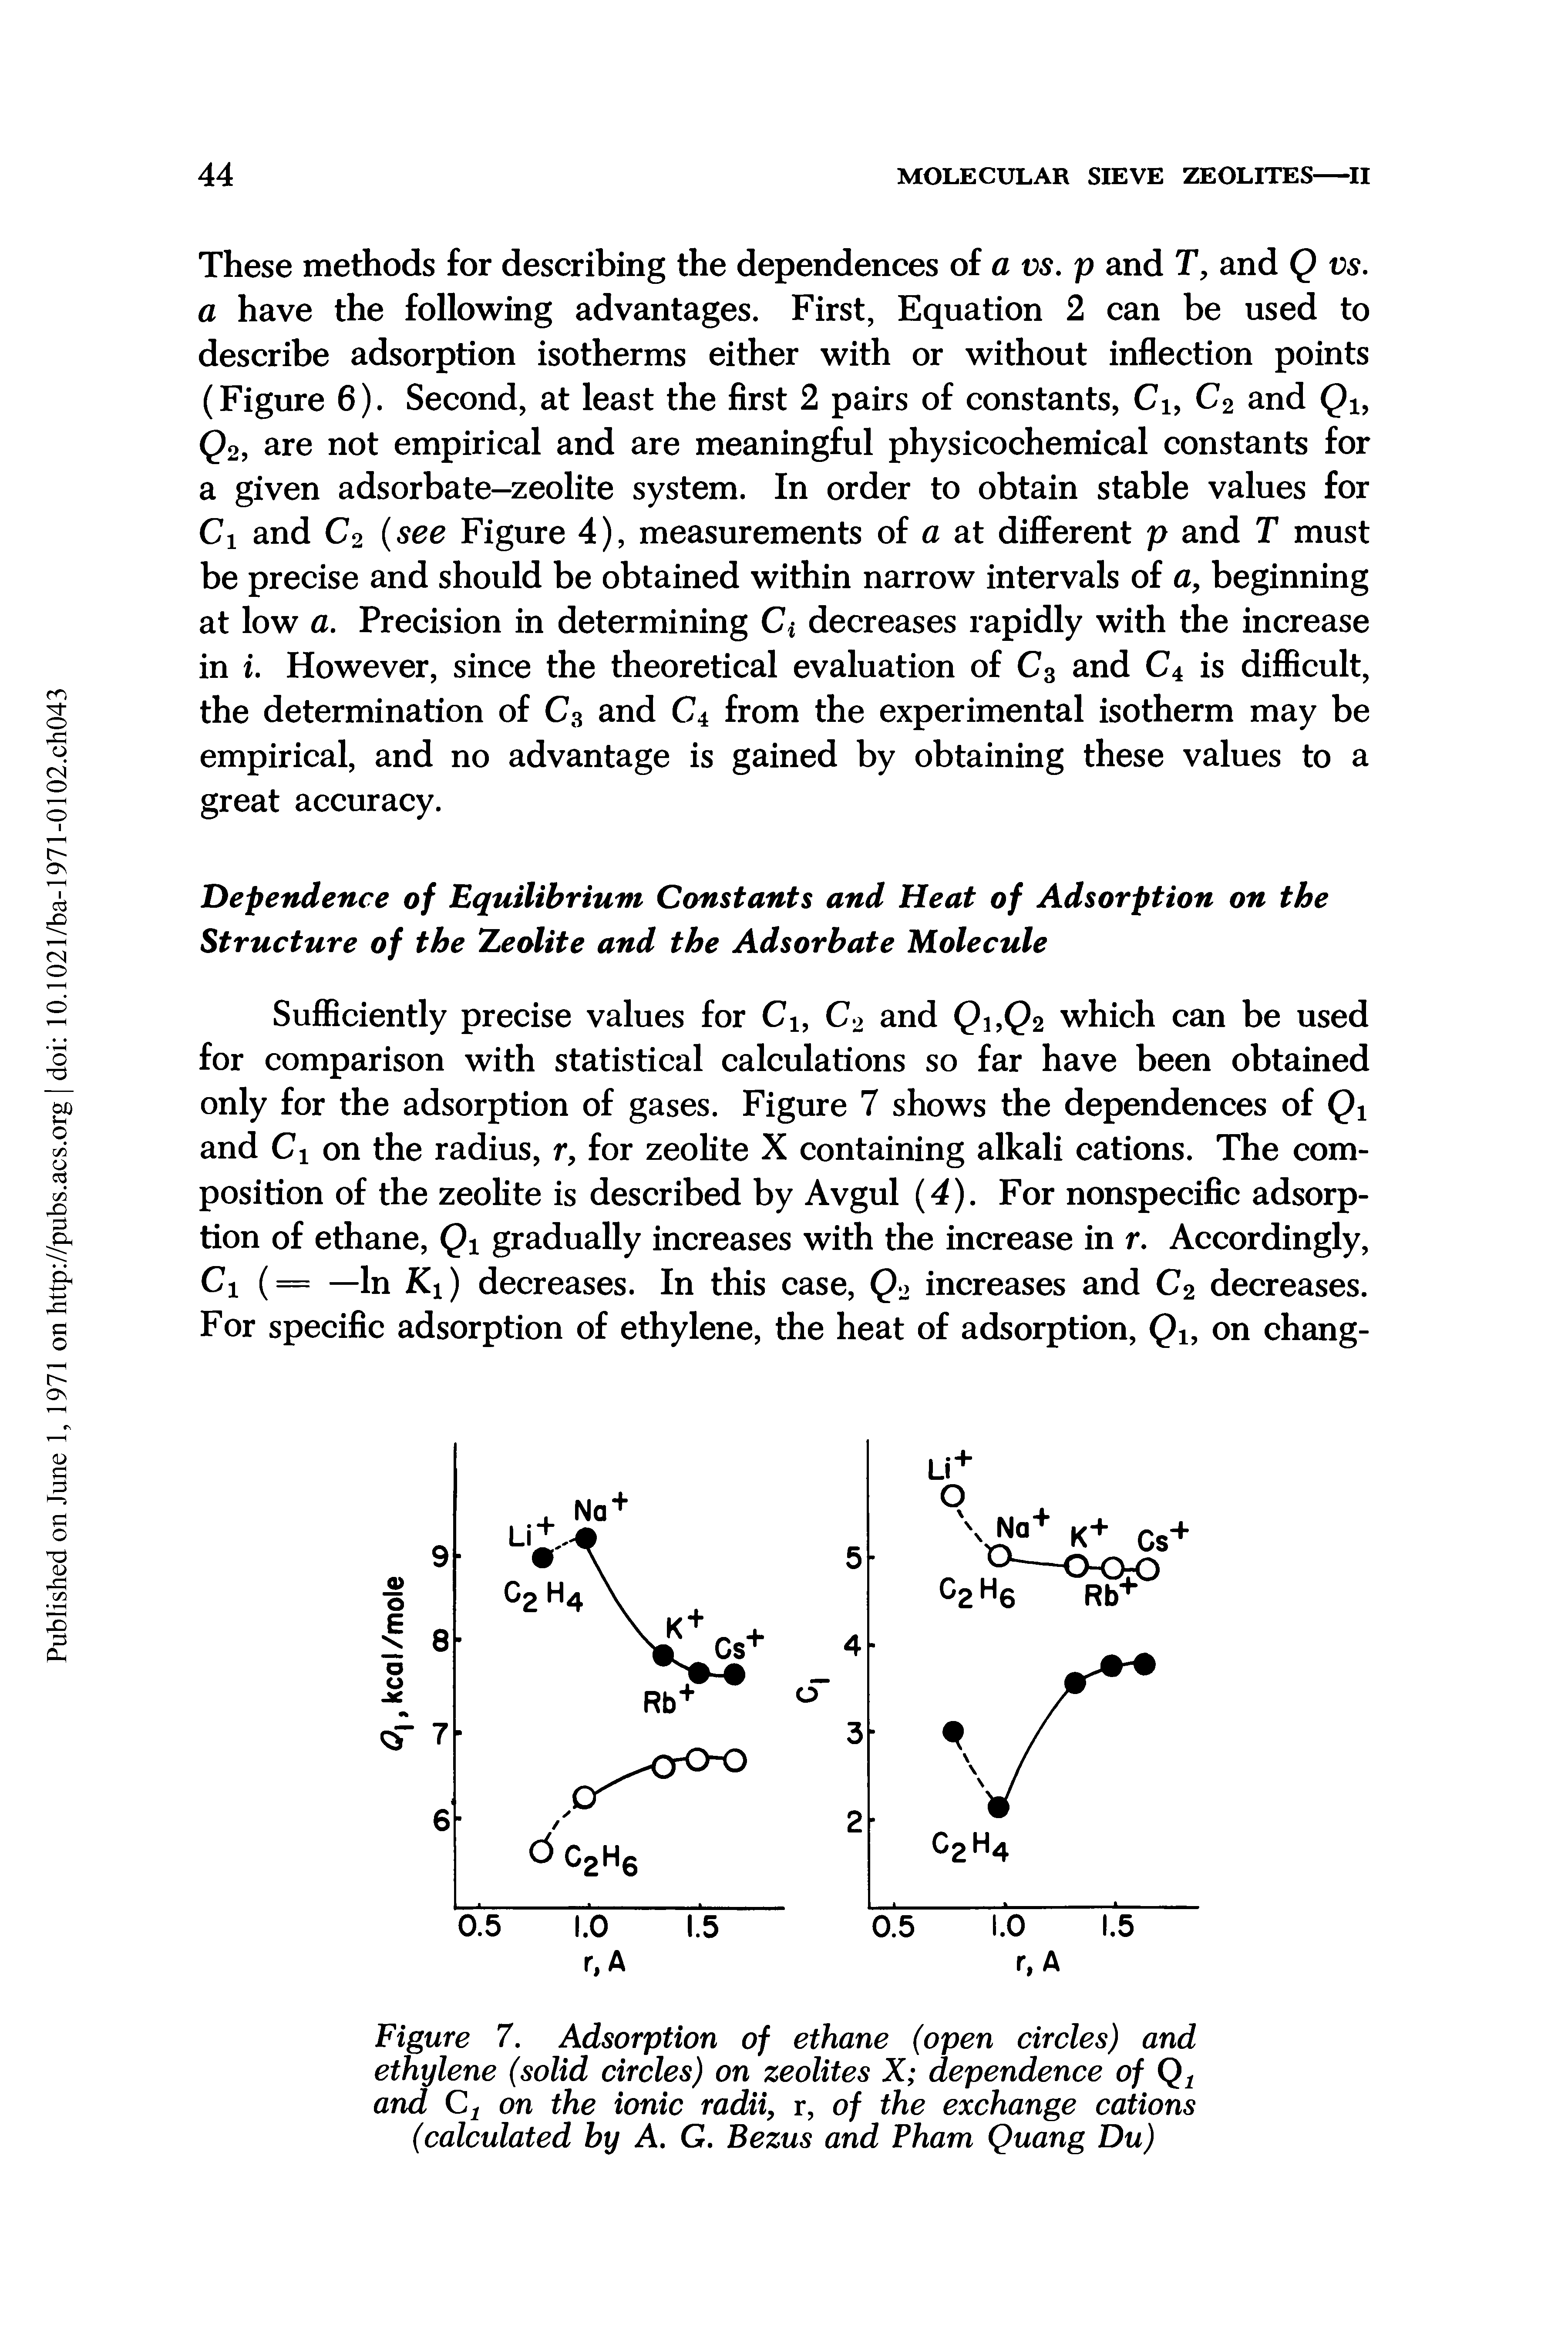 Figure 7. Adsorption of ethane (open circles) and ethylene (solid circles) on zeolites X dependence of and Cl on the ionic radii, r, of the exchange cations (calculated by A. G. Bezus and Pham Quang Du)...